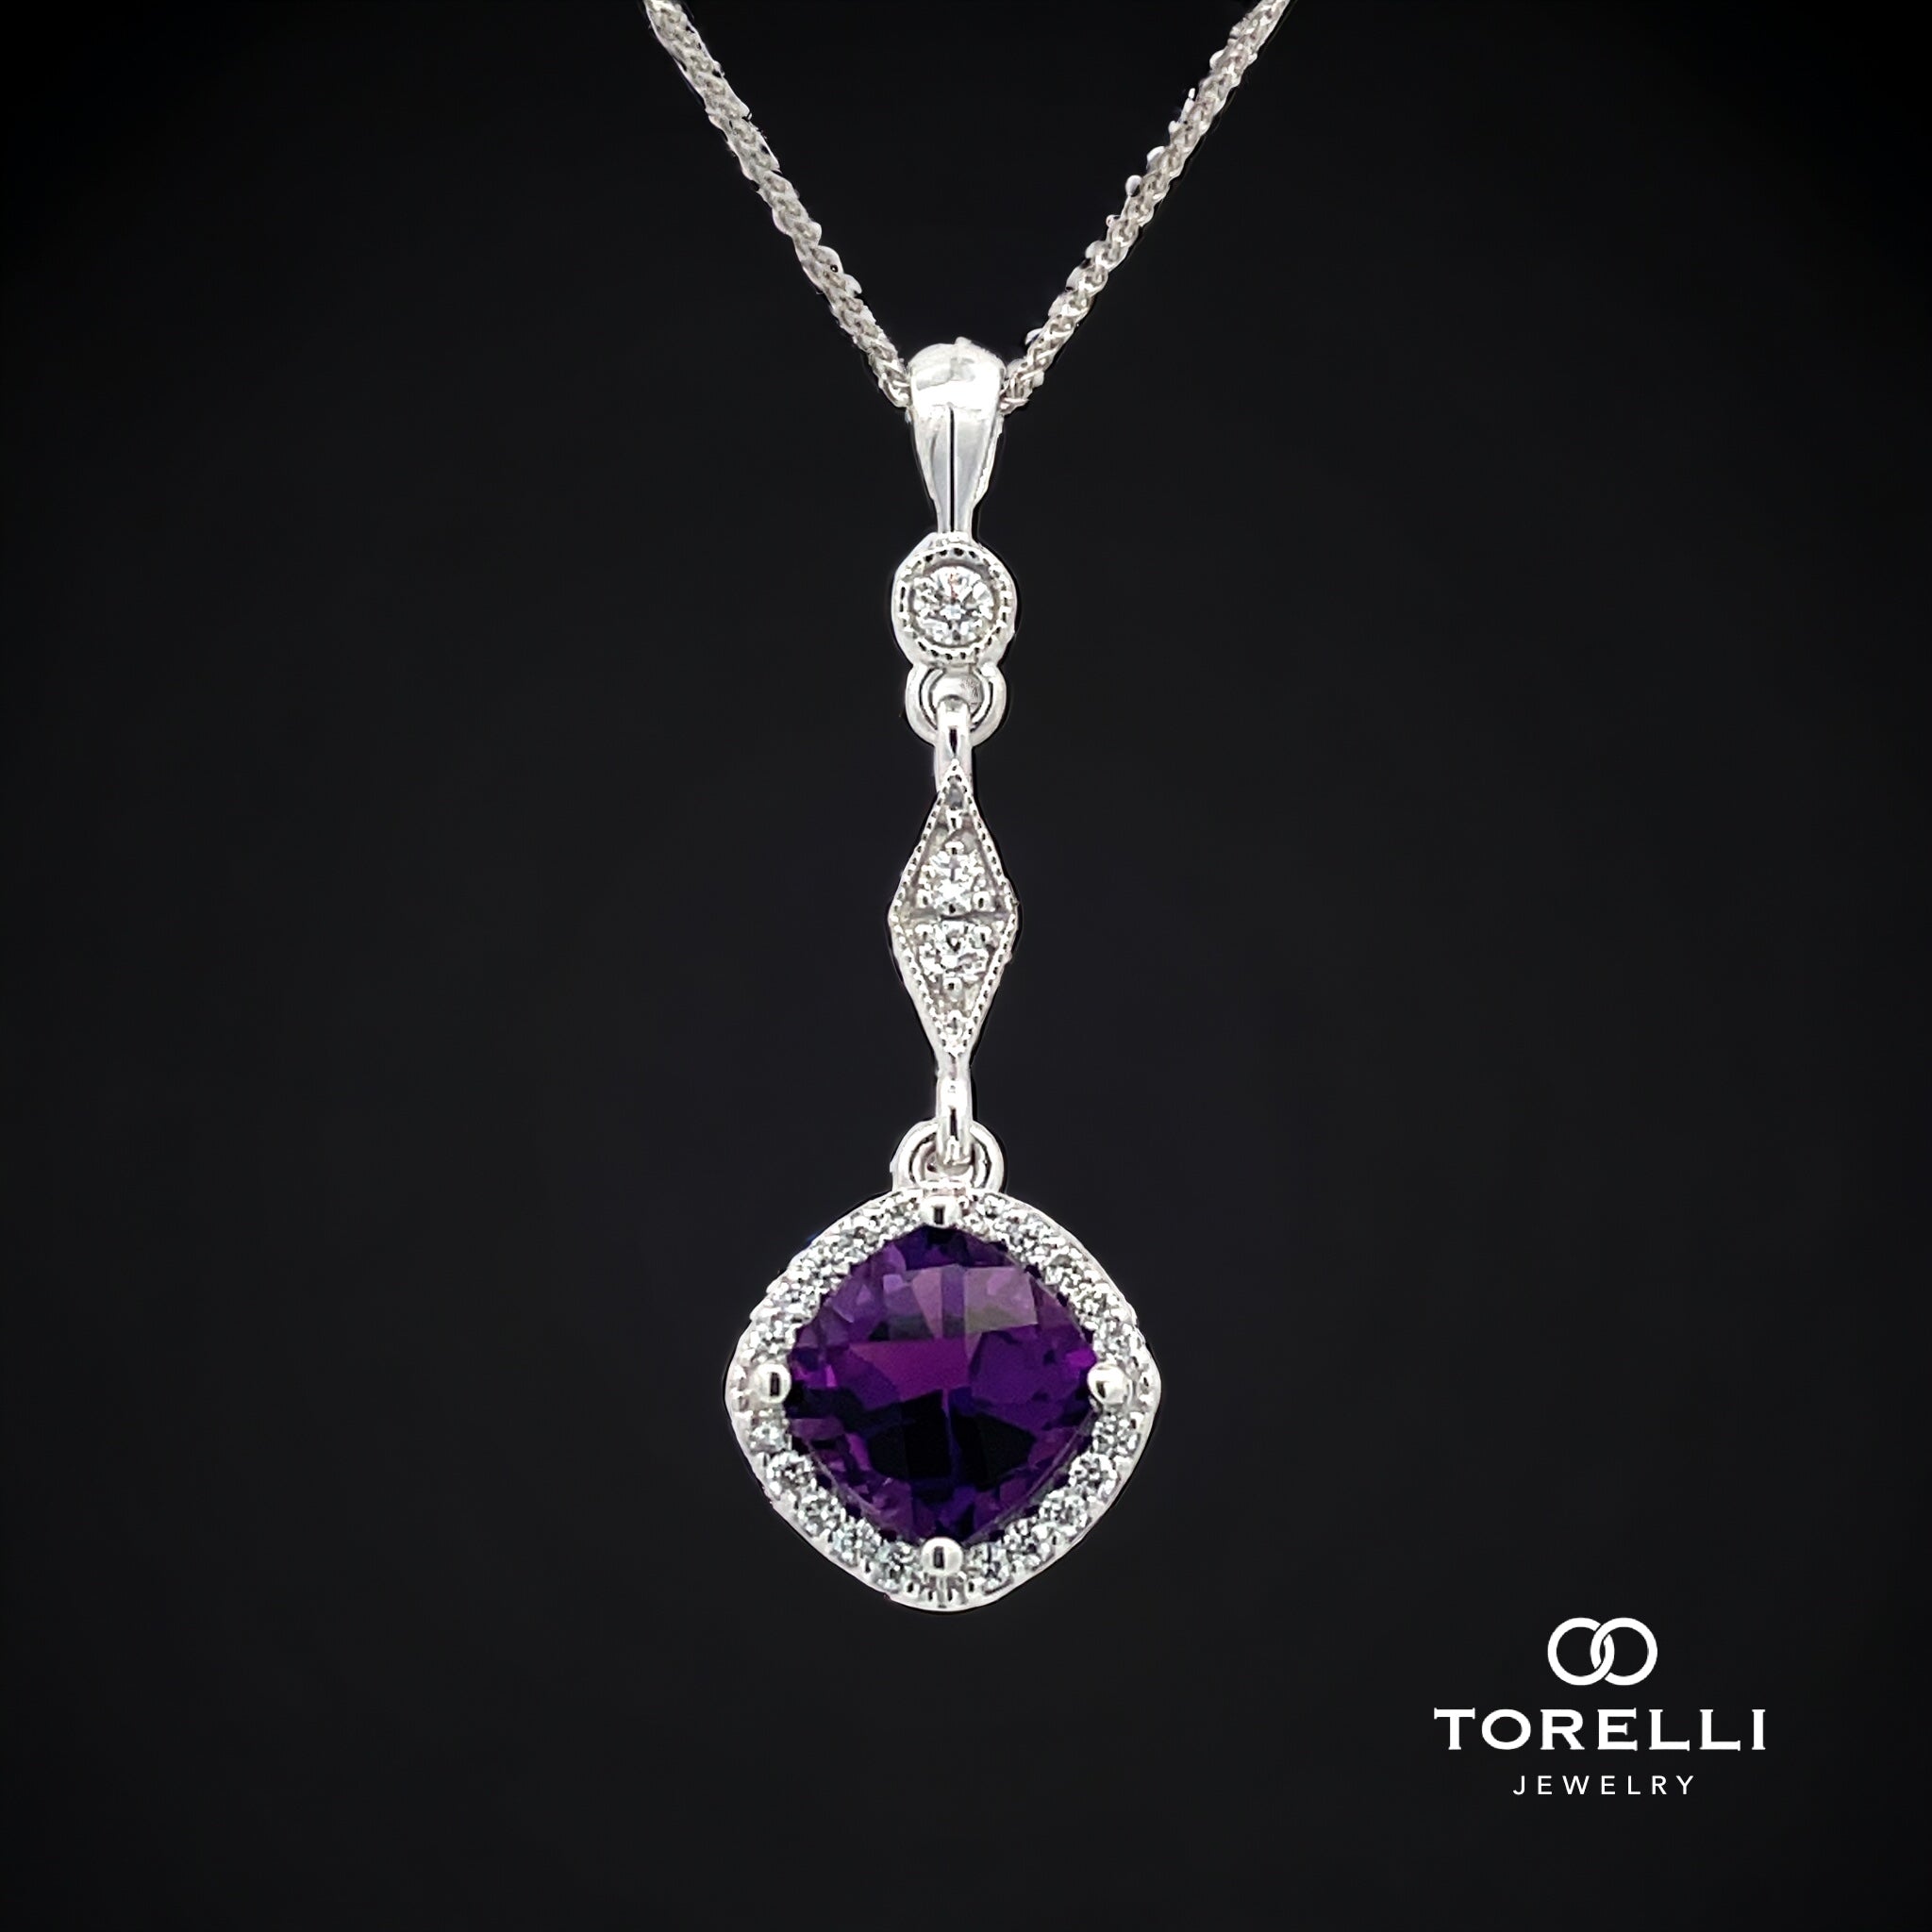 Allegra Necklace 14k White Gold Cushion-cut Amethyst with Diamonds